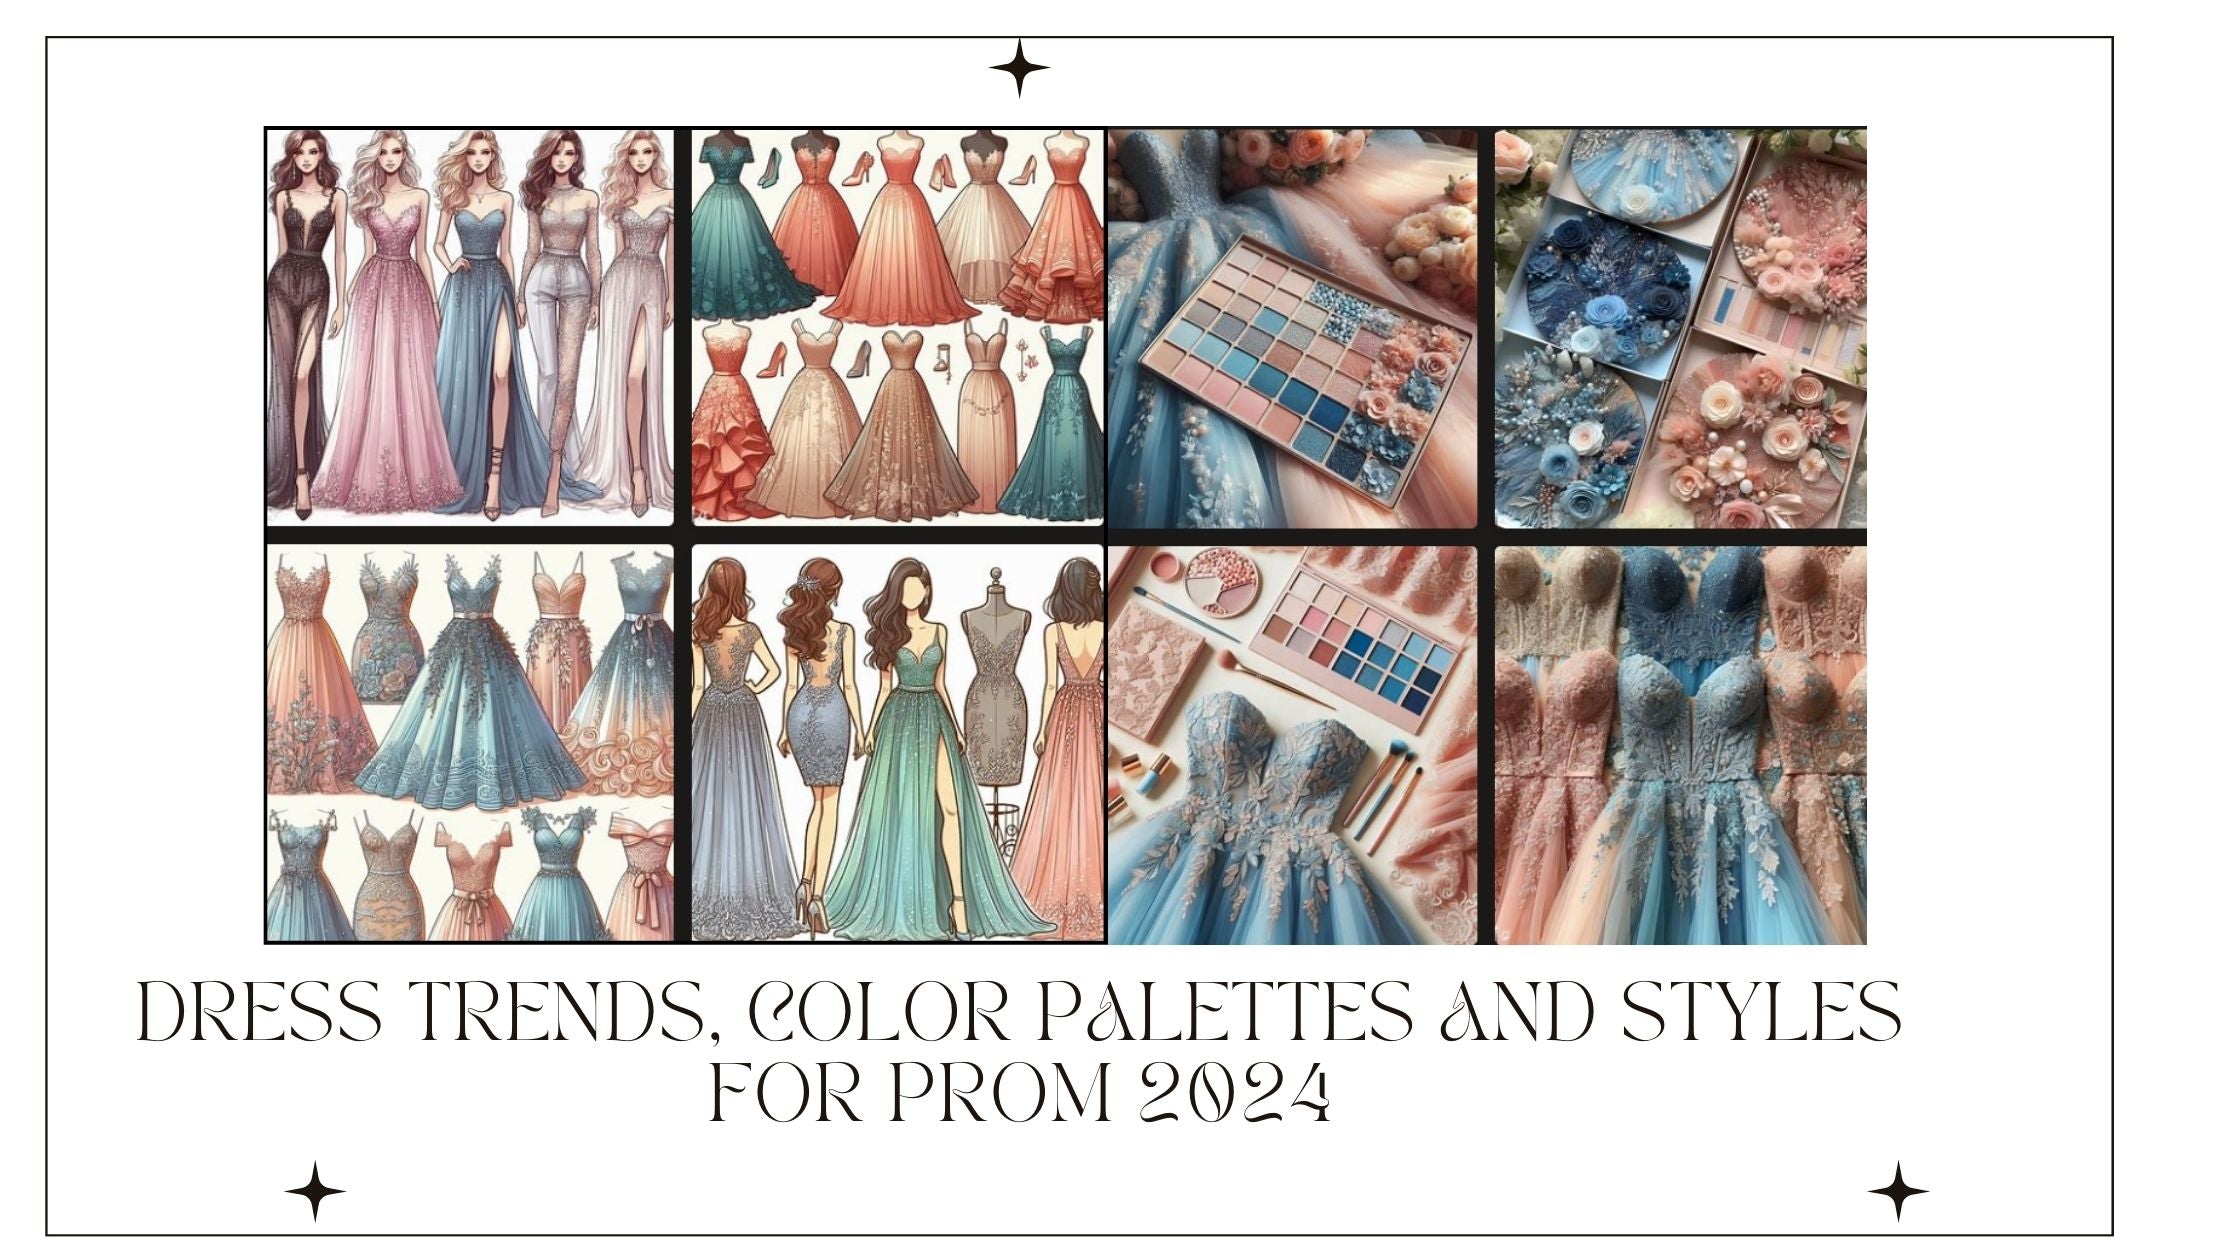 Dress Trends, Color Palettes and Styles for Prom 2024